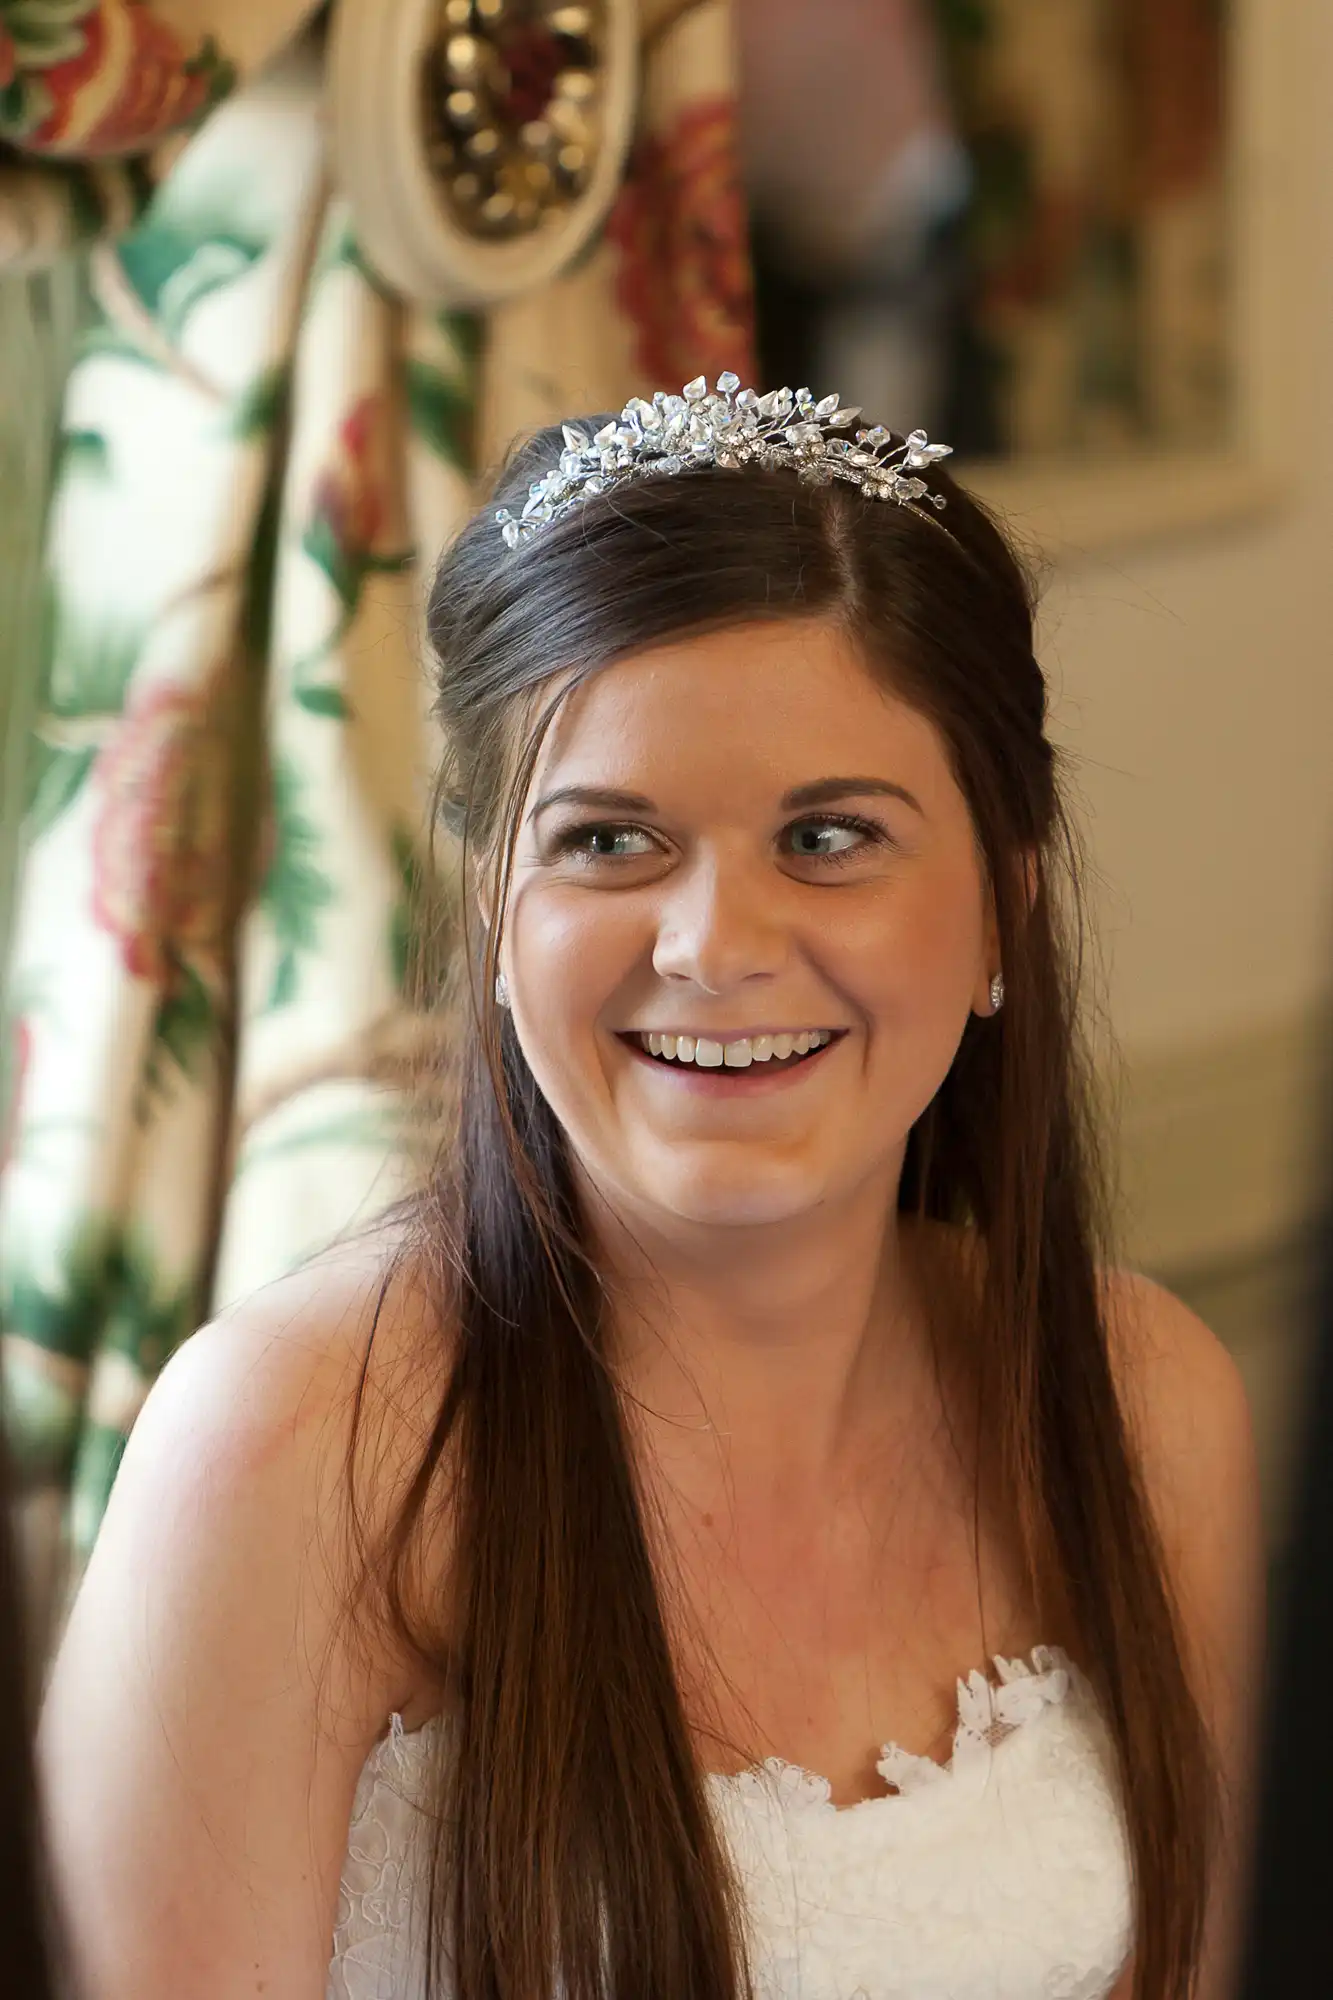 A smiling bride wearing a tiara sits in a room, with white floral dress details visible. .